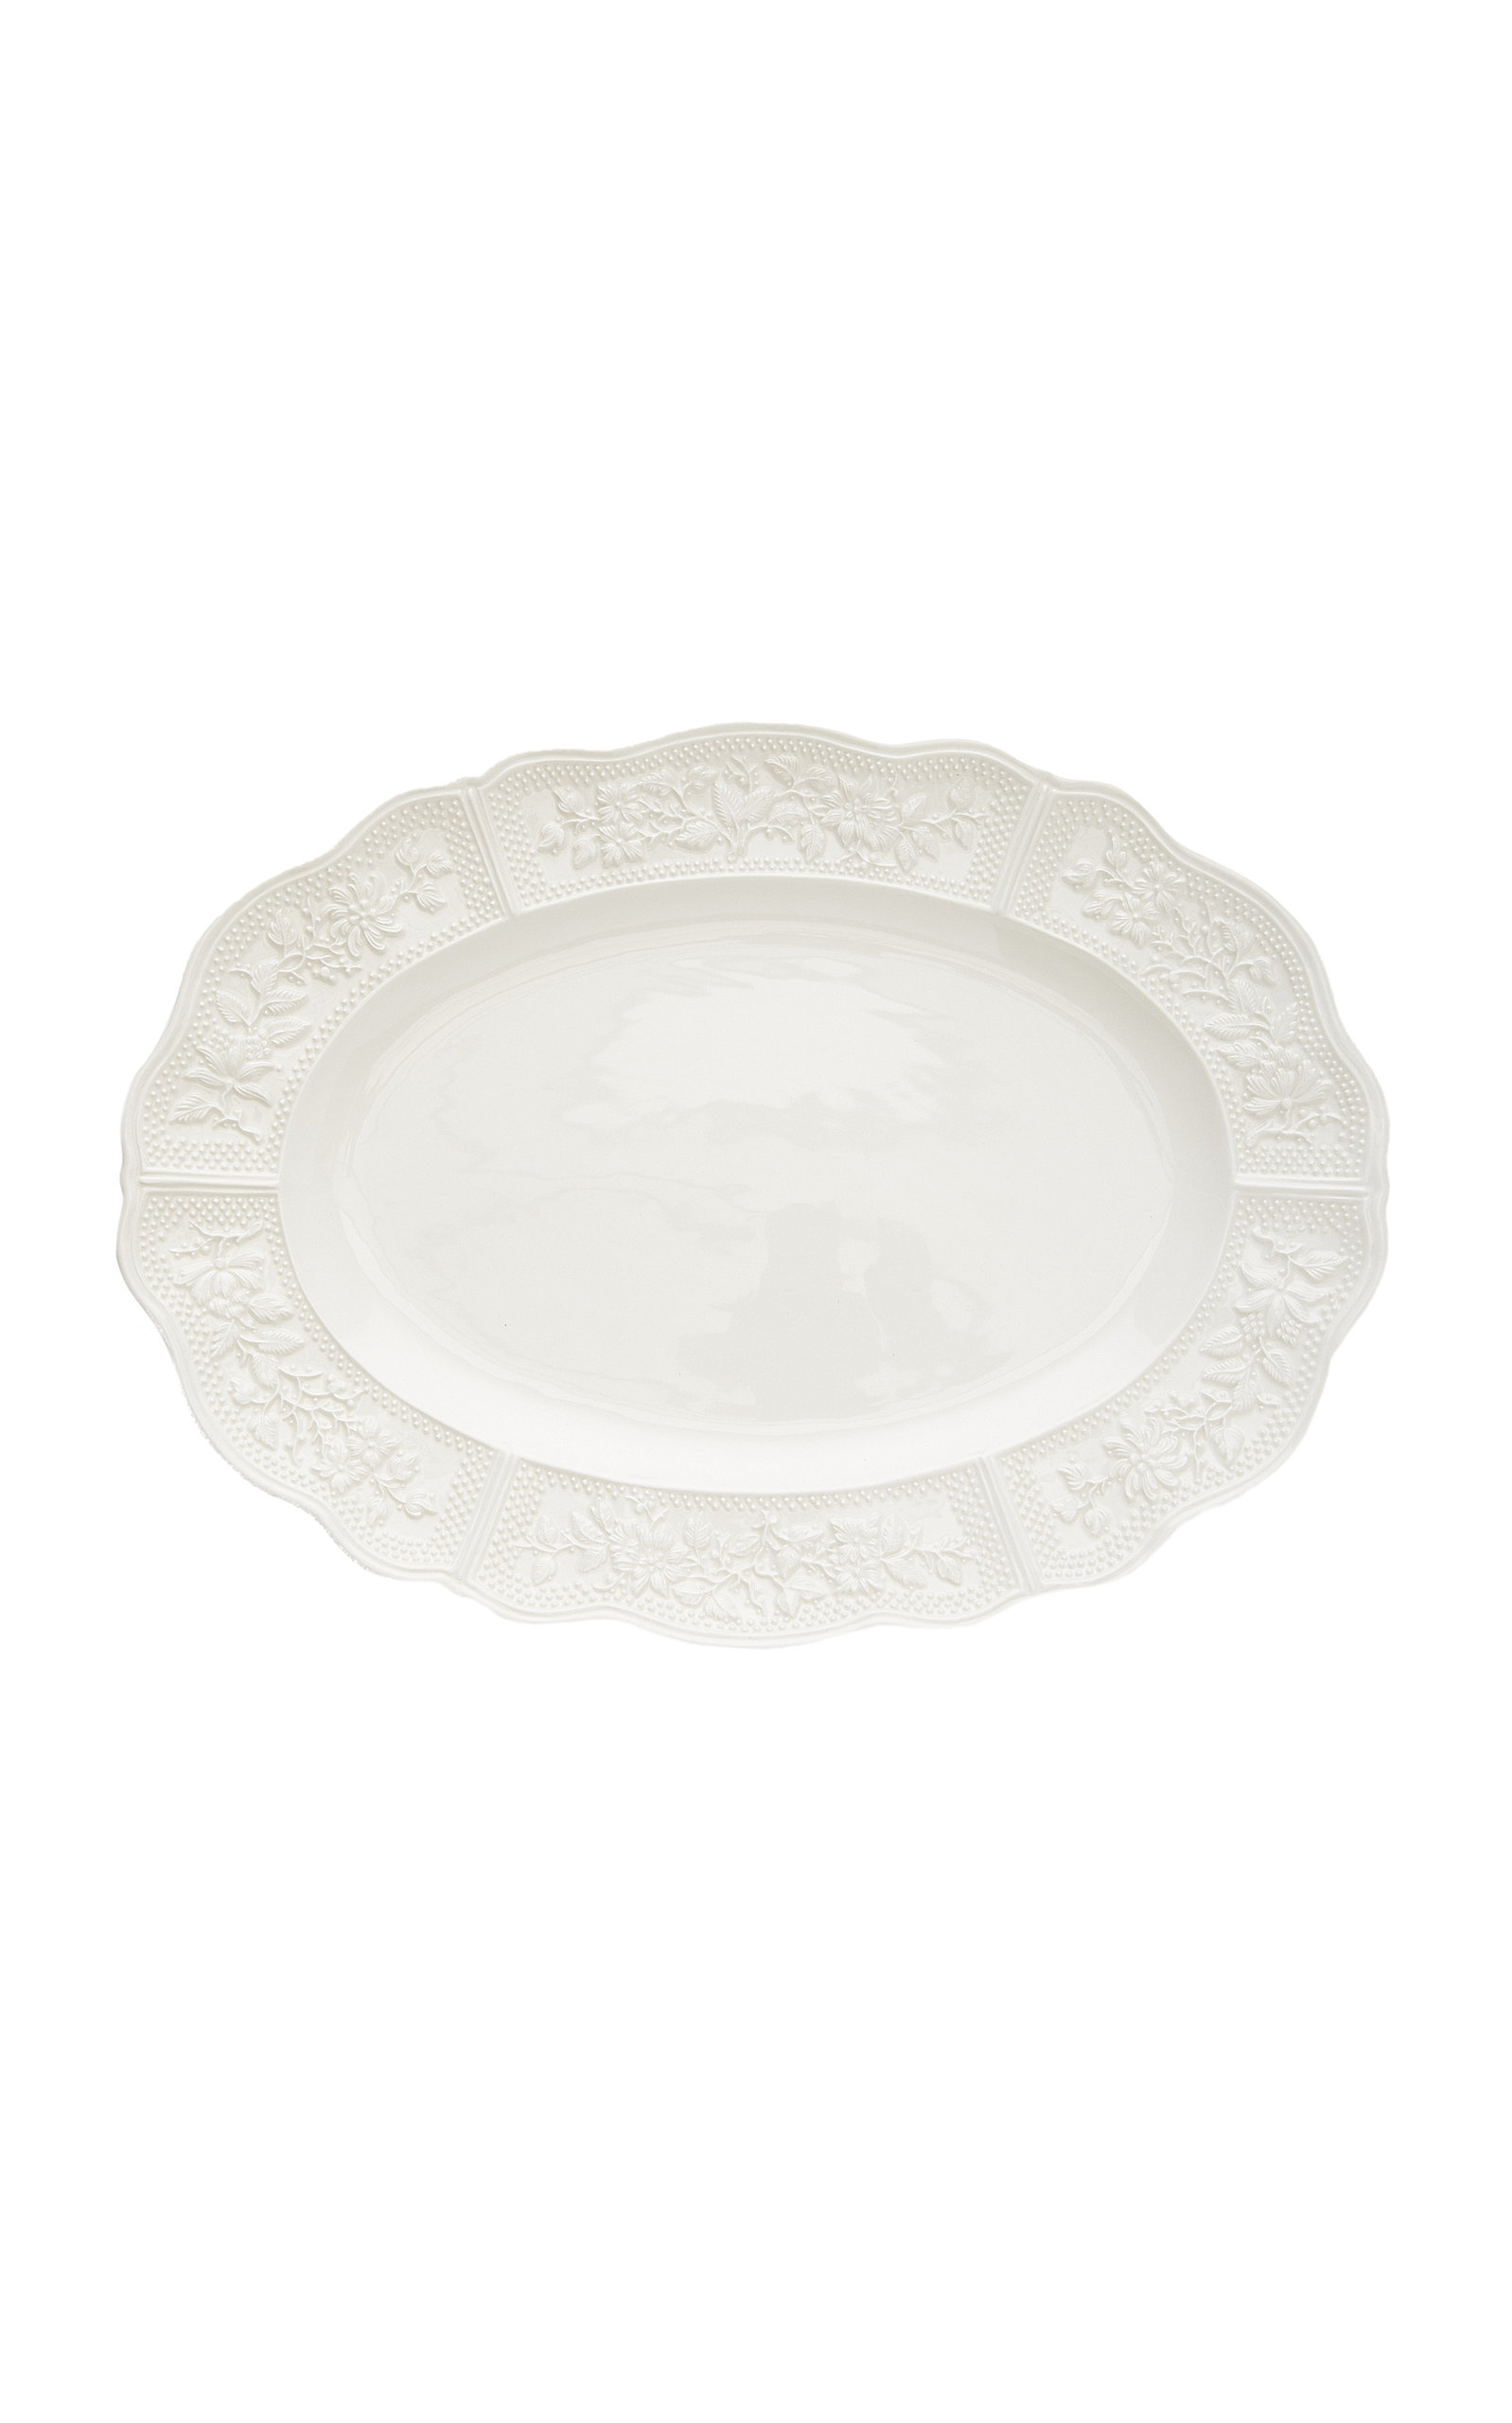 Moda Domus Relief And Doot Large Earthenware Plate In White